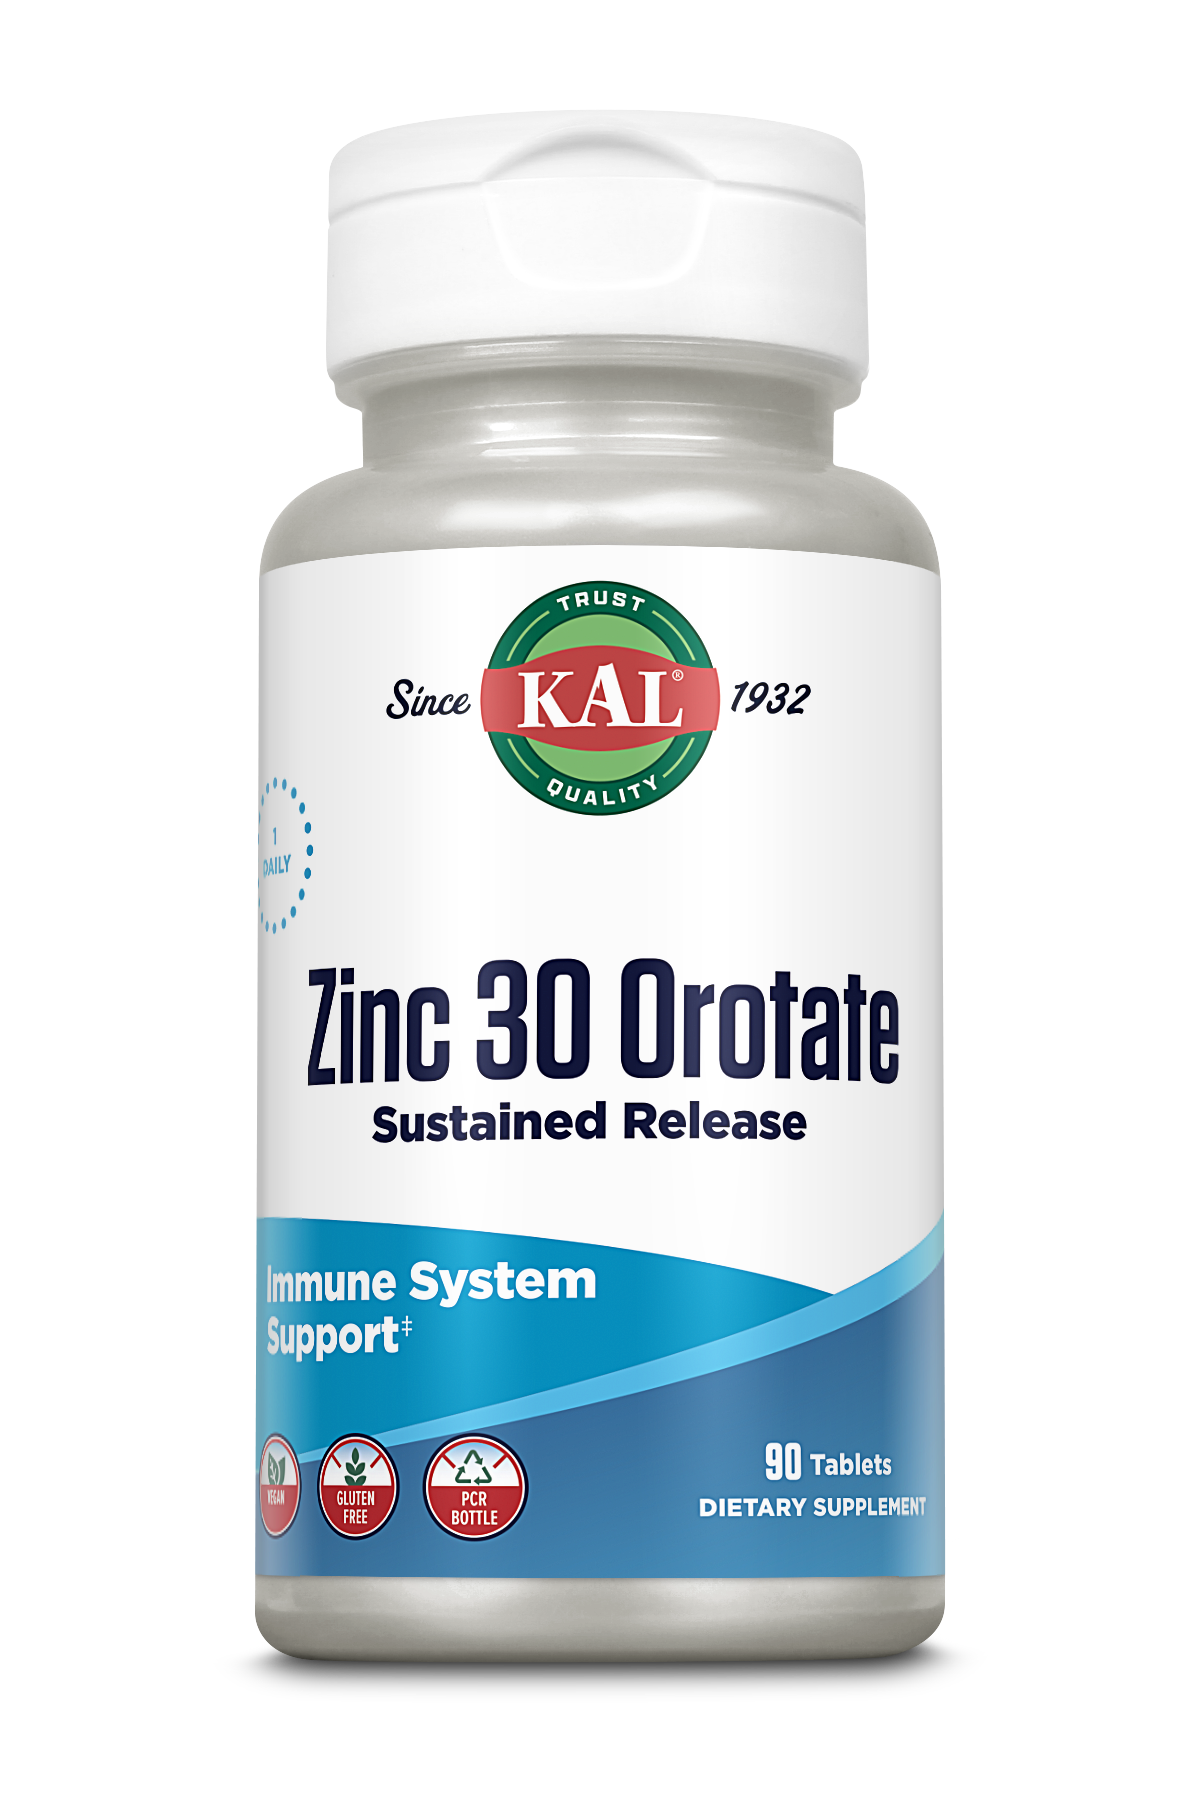 Zinc 30 Orotate Sustained Release Tablets